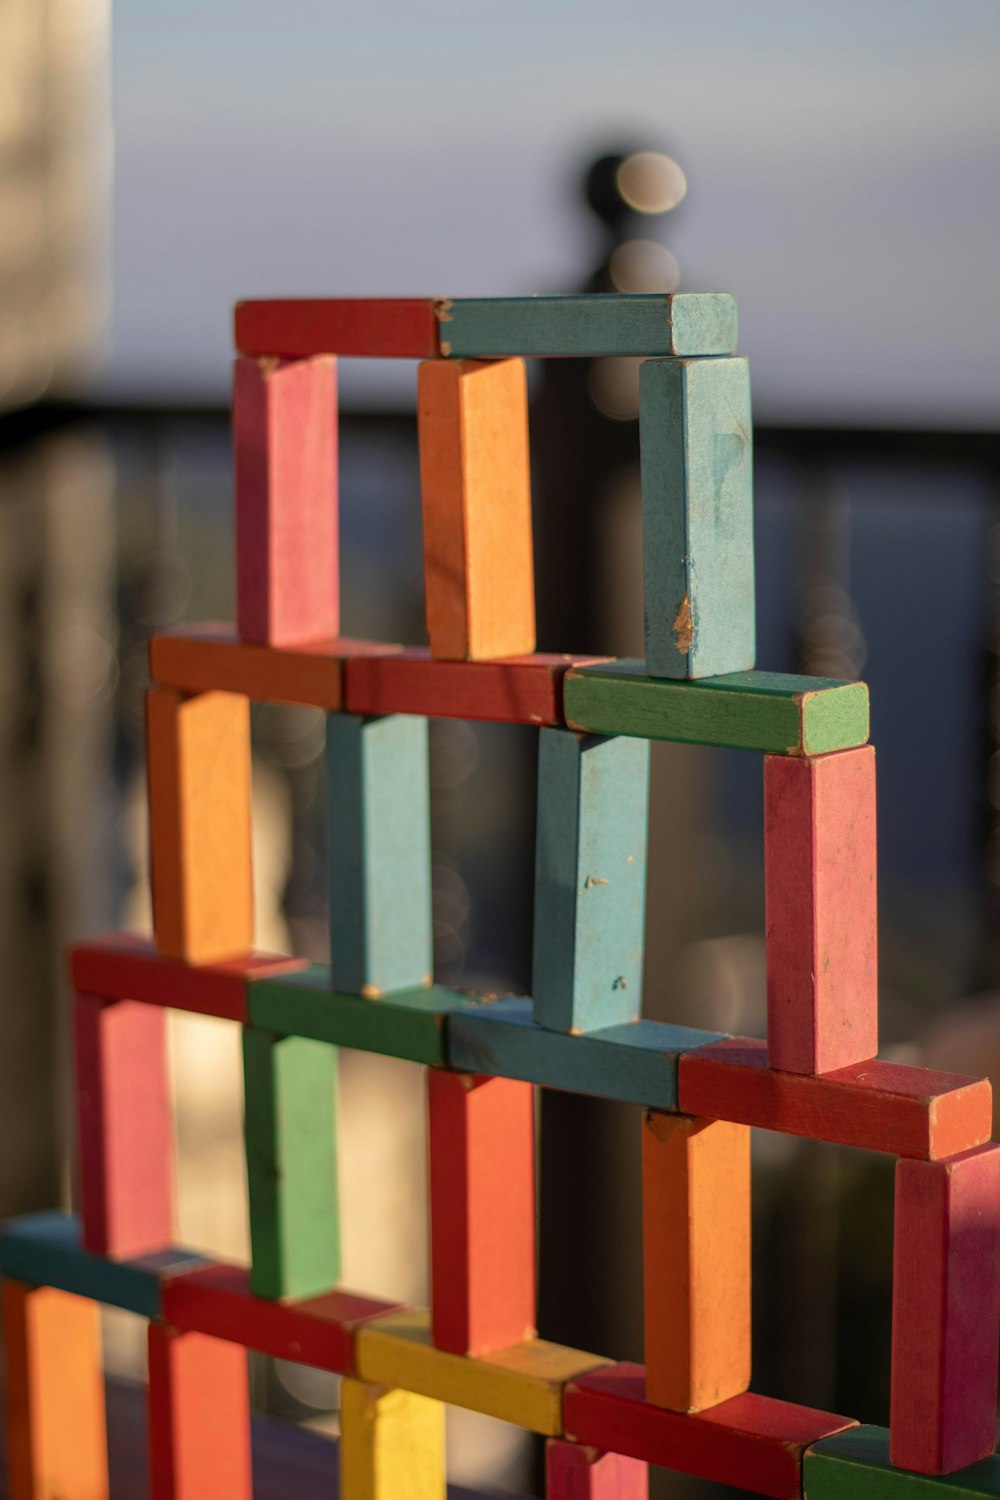 a multicolored building made of wooden blocks